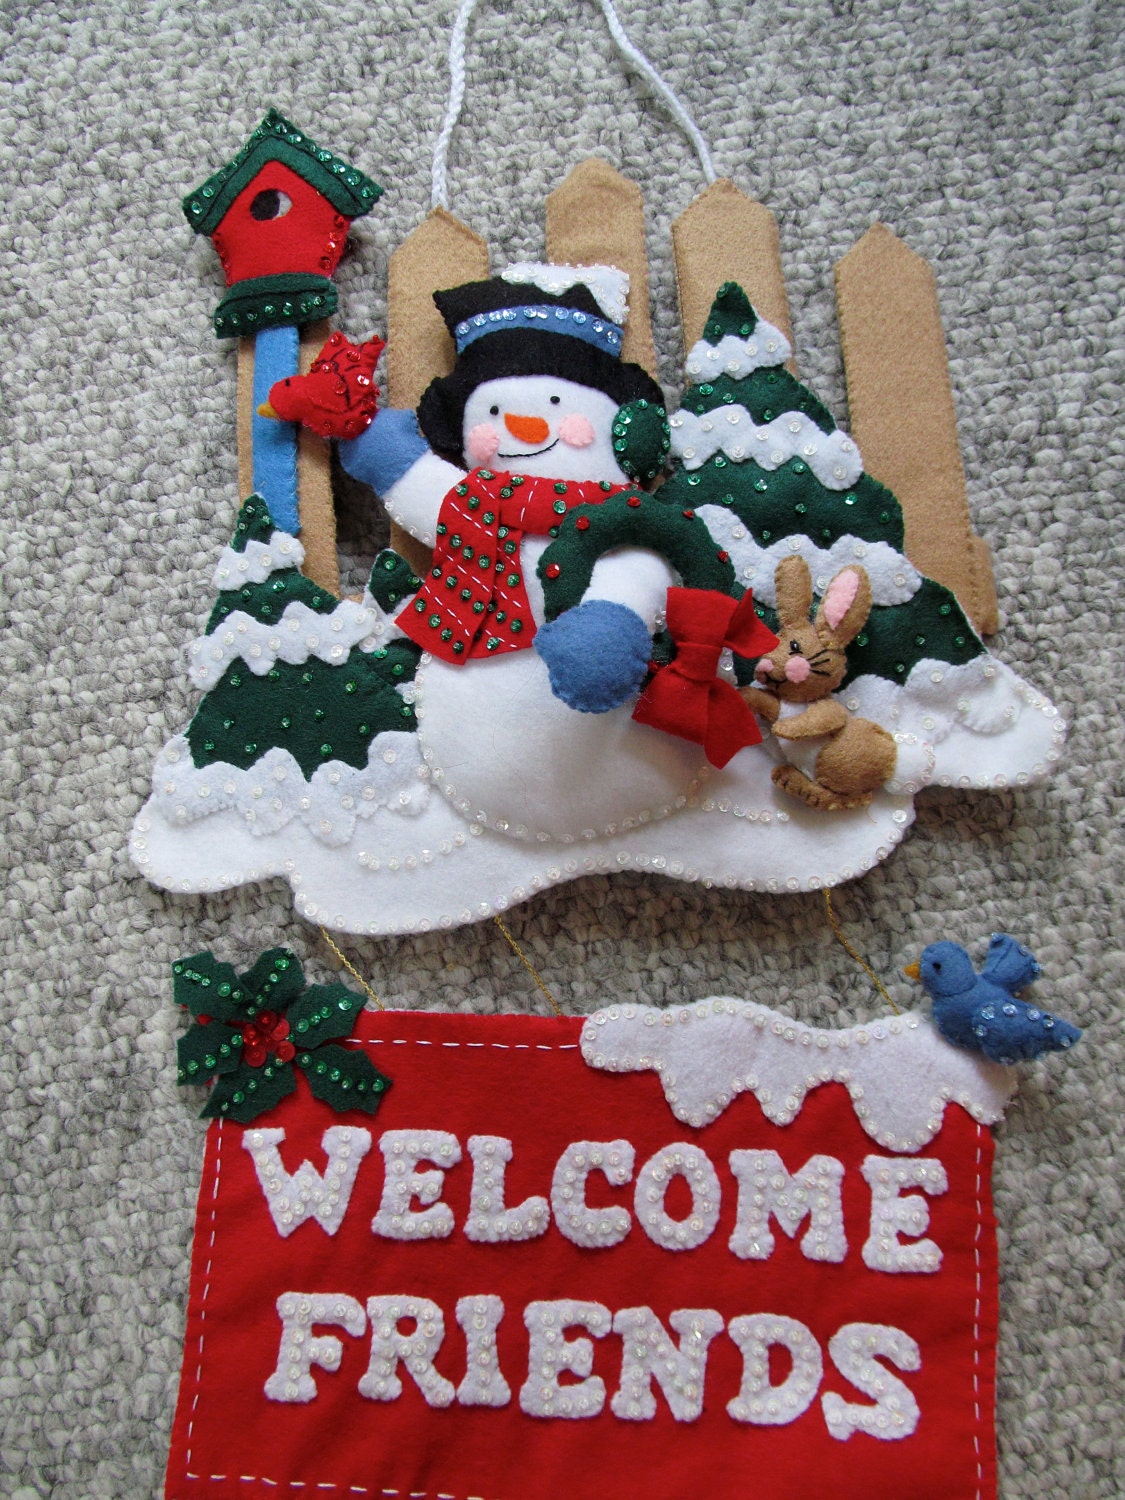 Welcome Friends Snowman Felt Wall Hanging Decoration Completed Handmade from Bucilla Kit